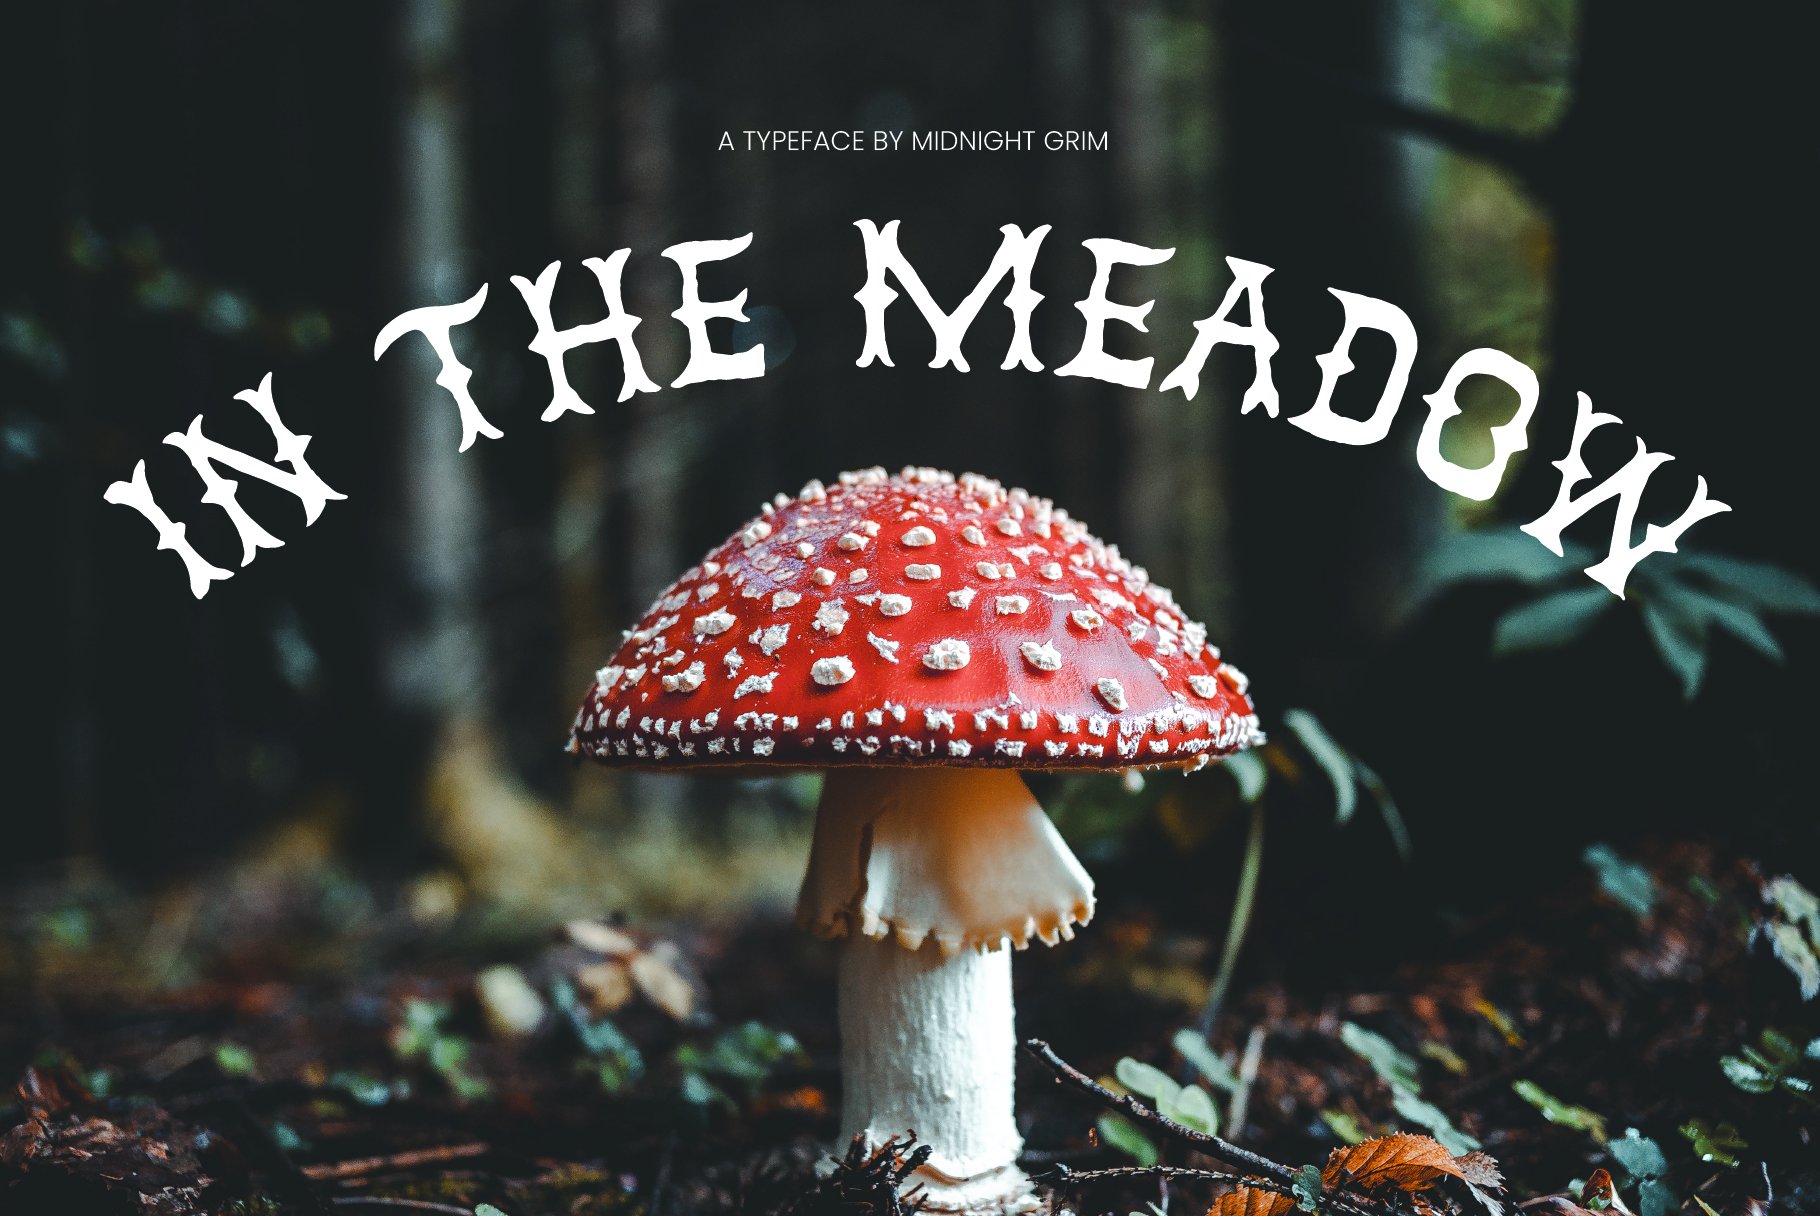 In the Meadow cover image.